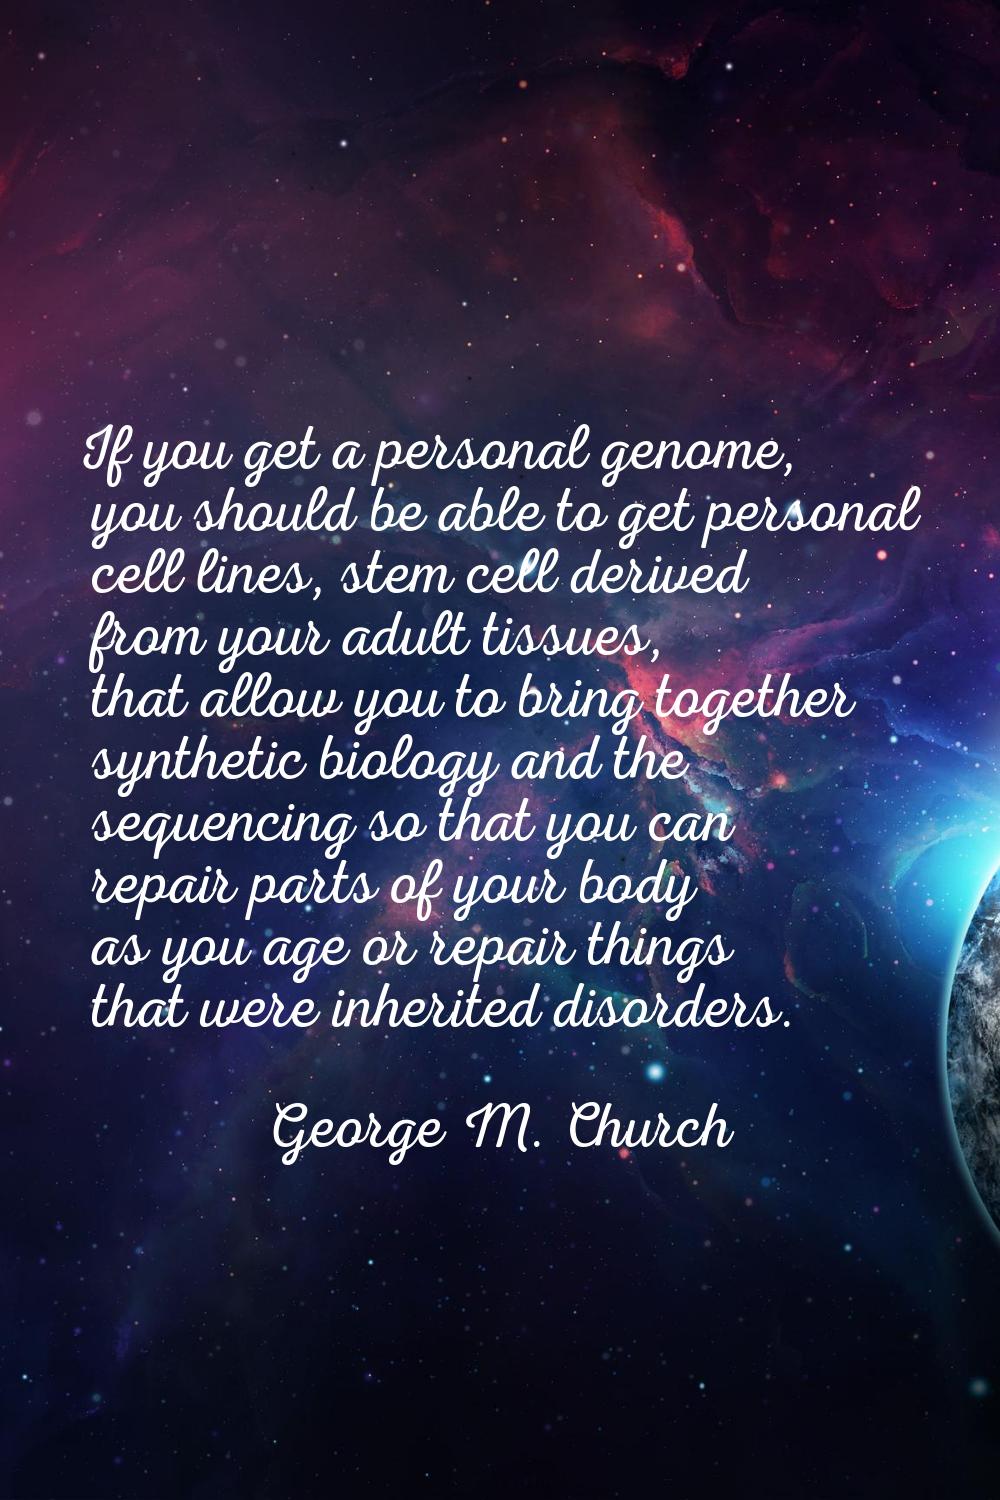 If you get a personal genome, you should be able to get personal cell lines, stem cell derived from